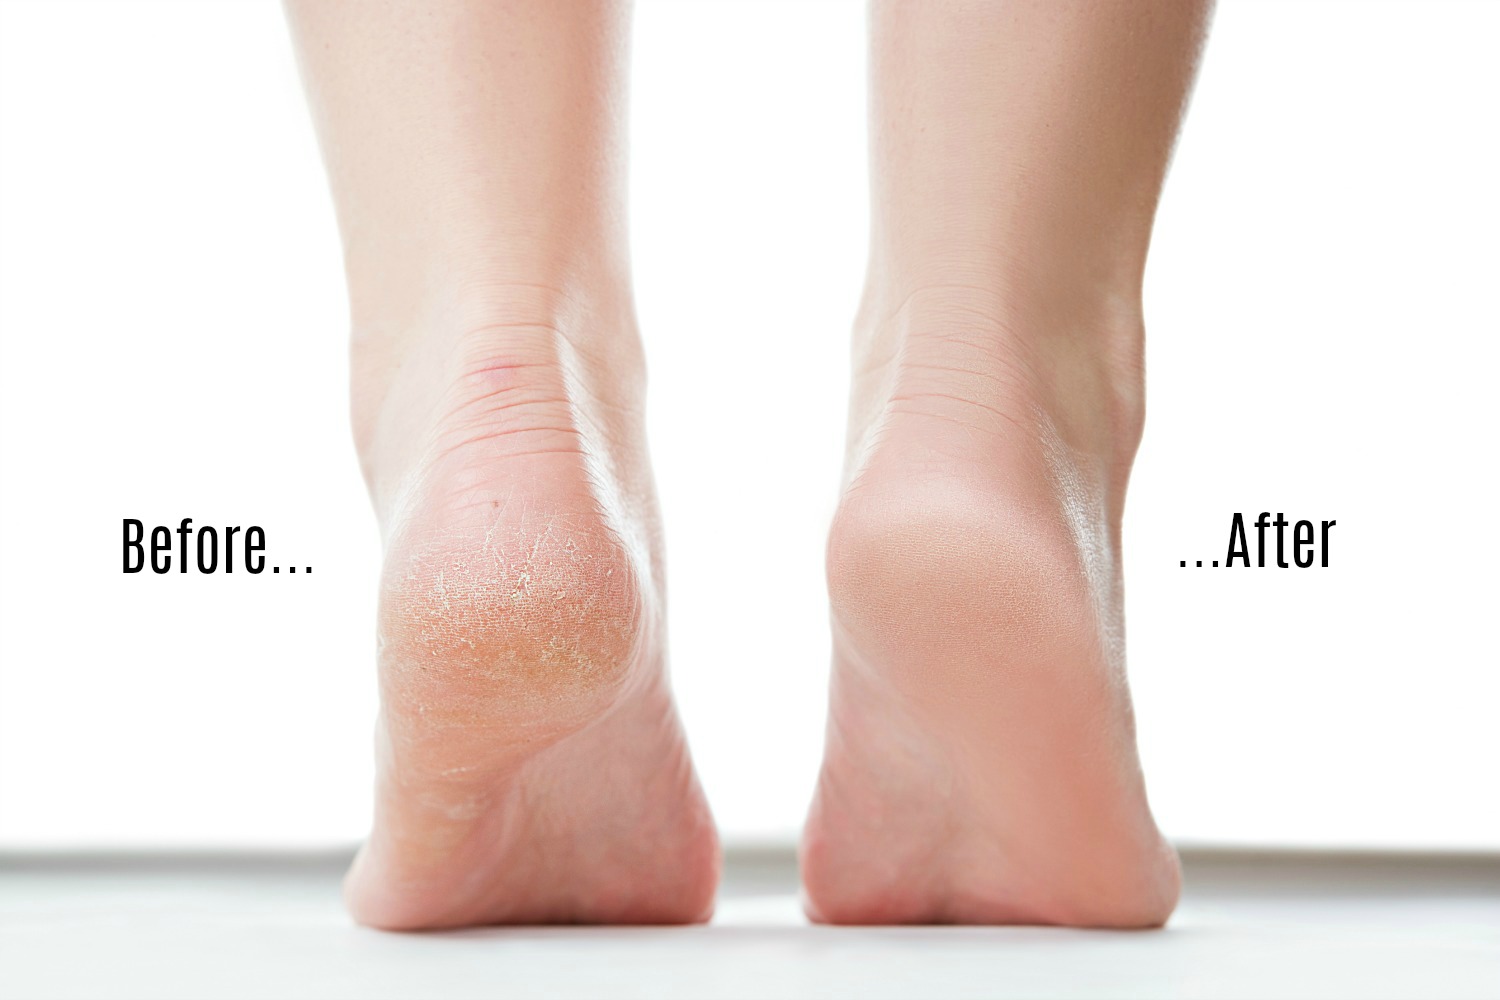 How To Easily Get Rid Of The Dry Skin At The Bottom Of Your Feet